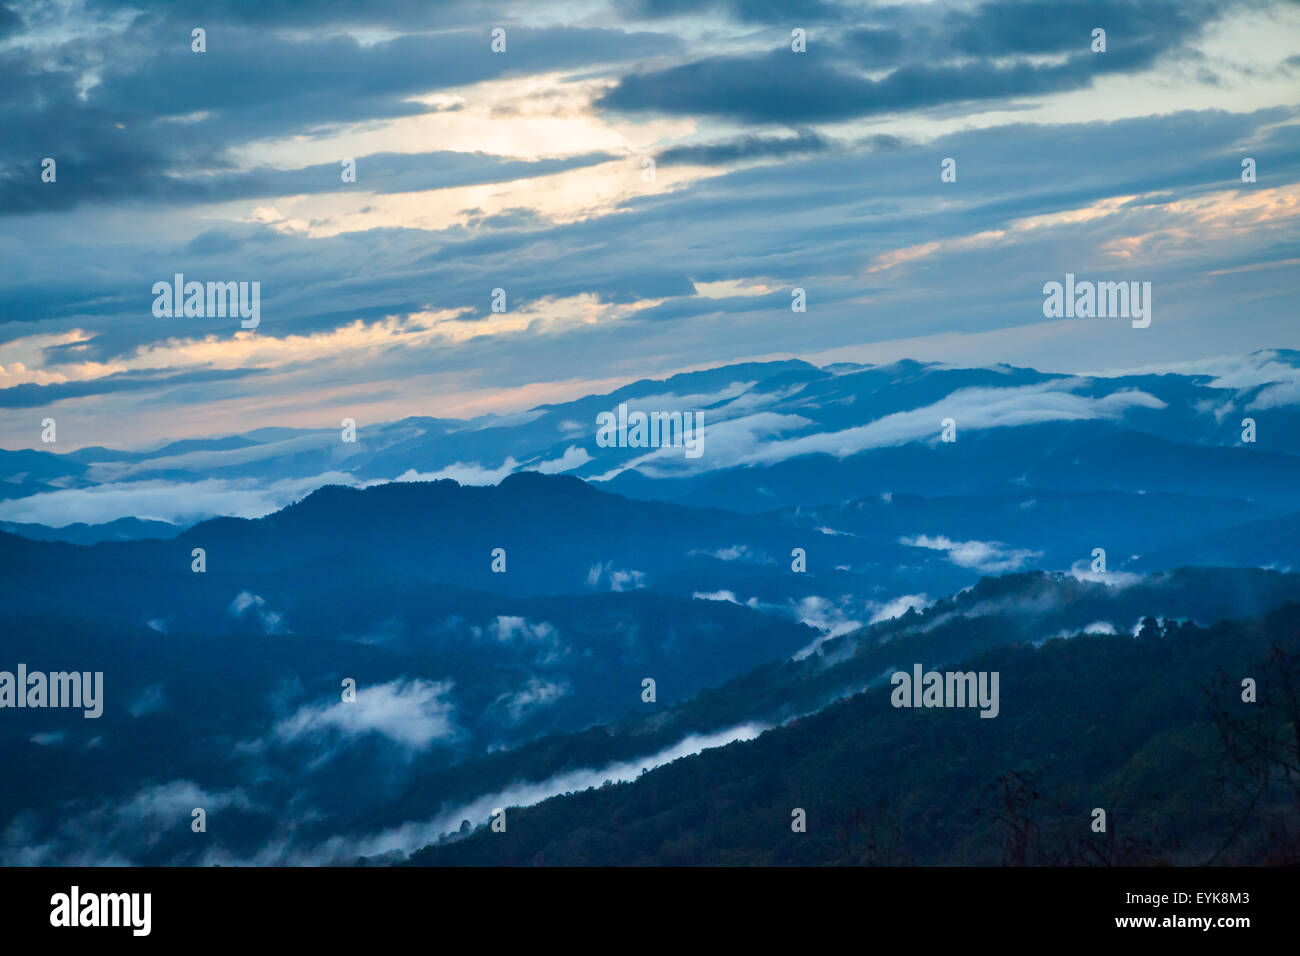 Landscape of forest on hilly landscape in Kinabalu Park, Ranau, Sabah, Malaysia. Stock Photo